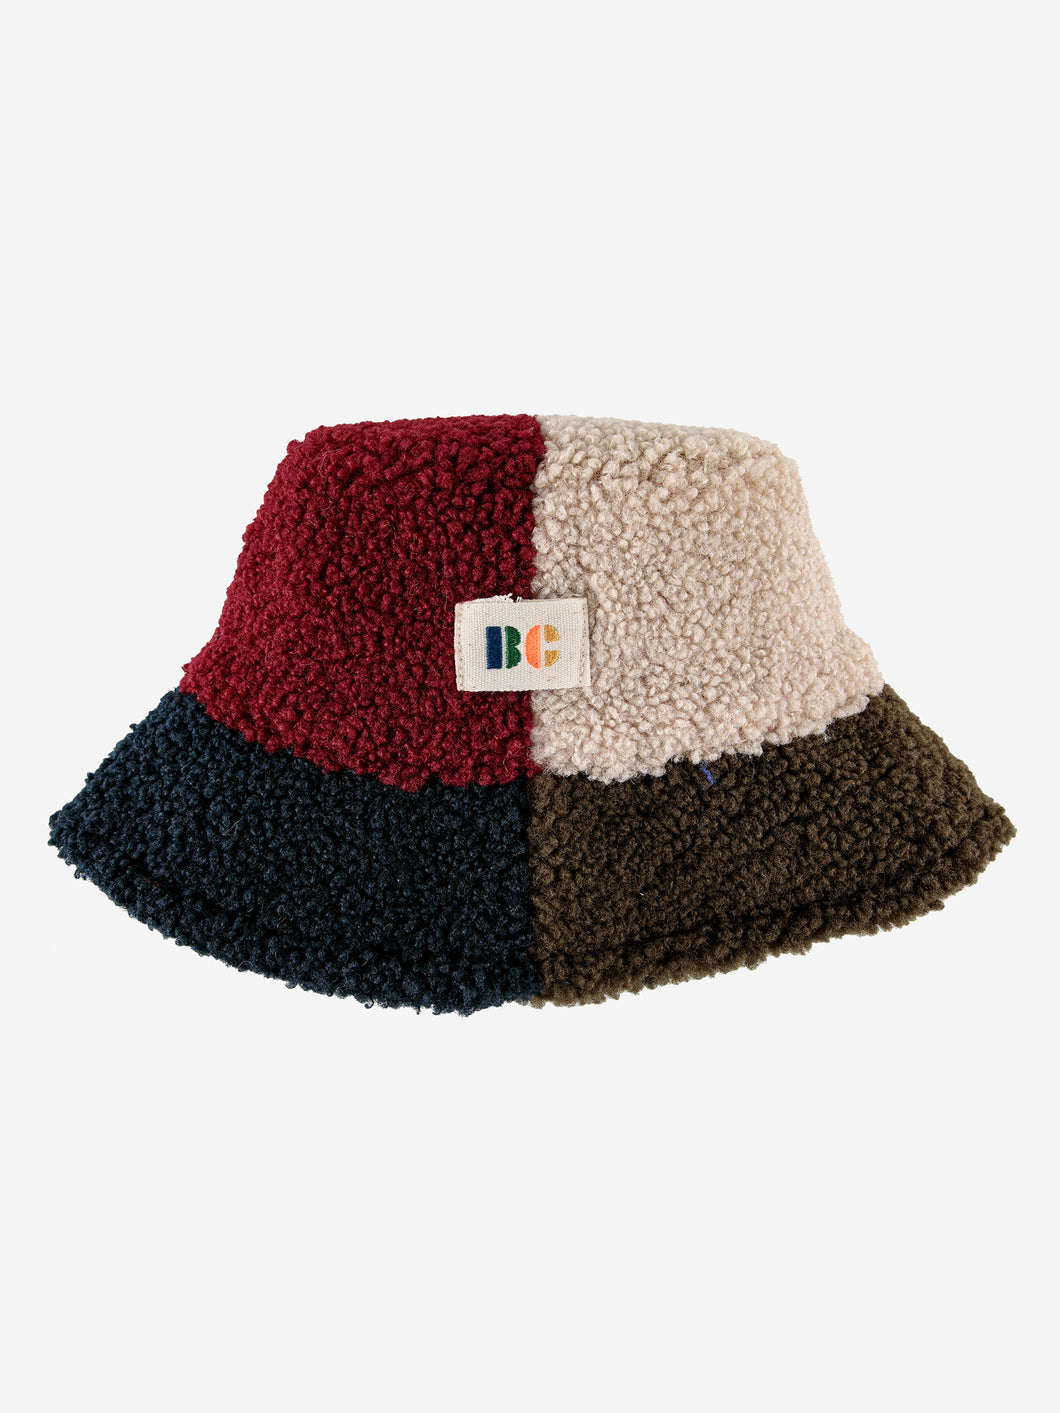 Color Block sheepskin hat 23AW / ボボショーズ キッズ シープスキンバケツハット